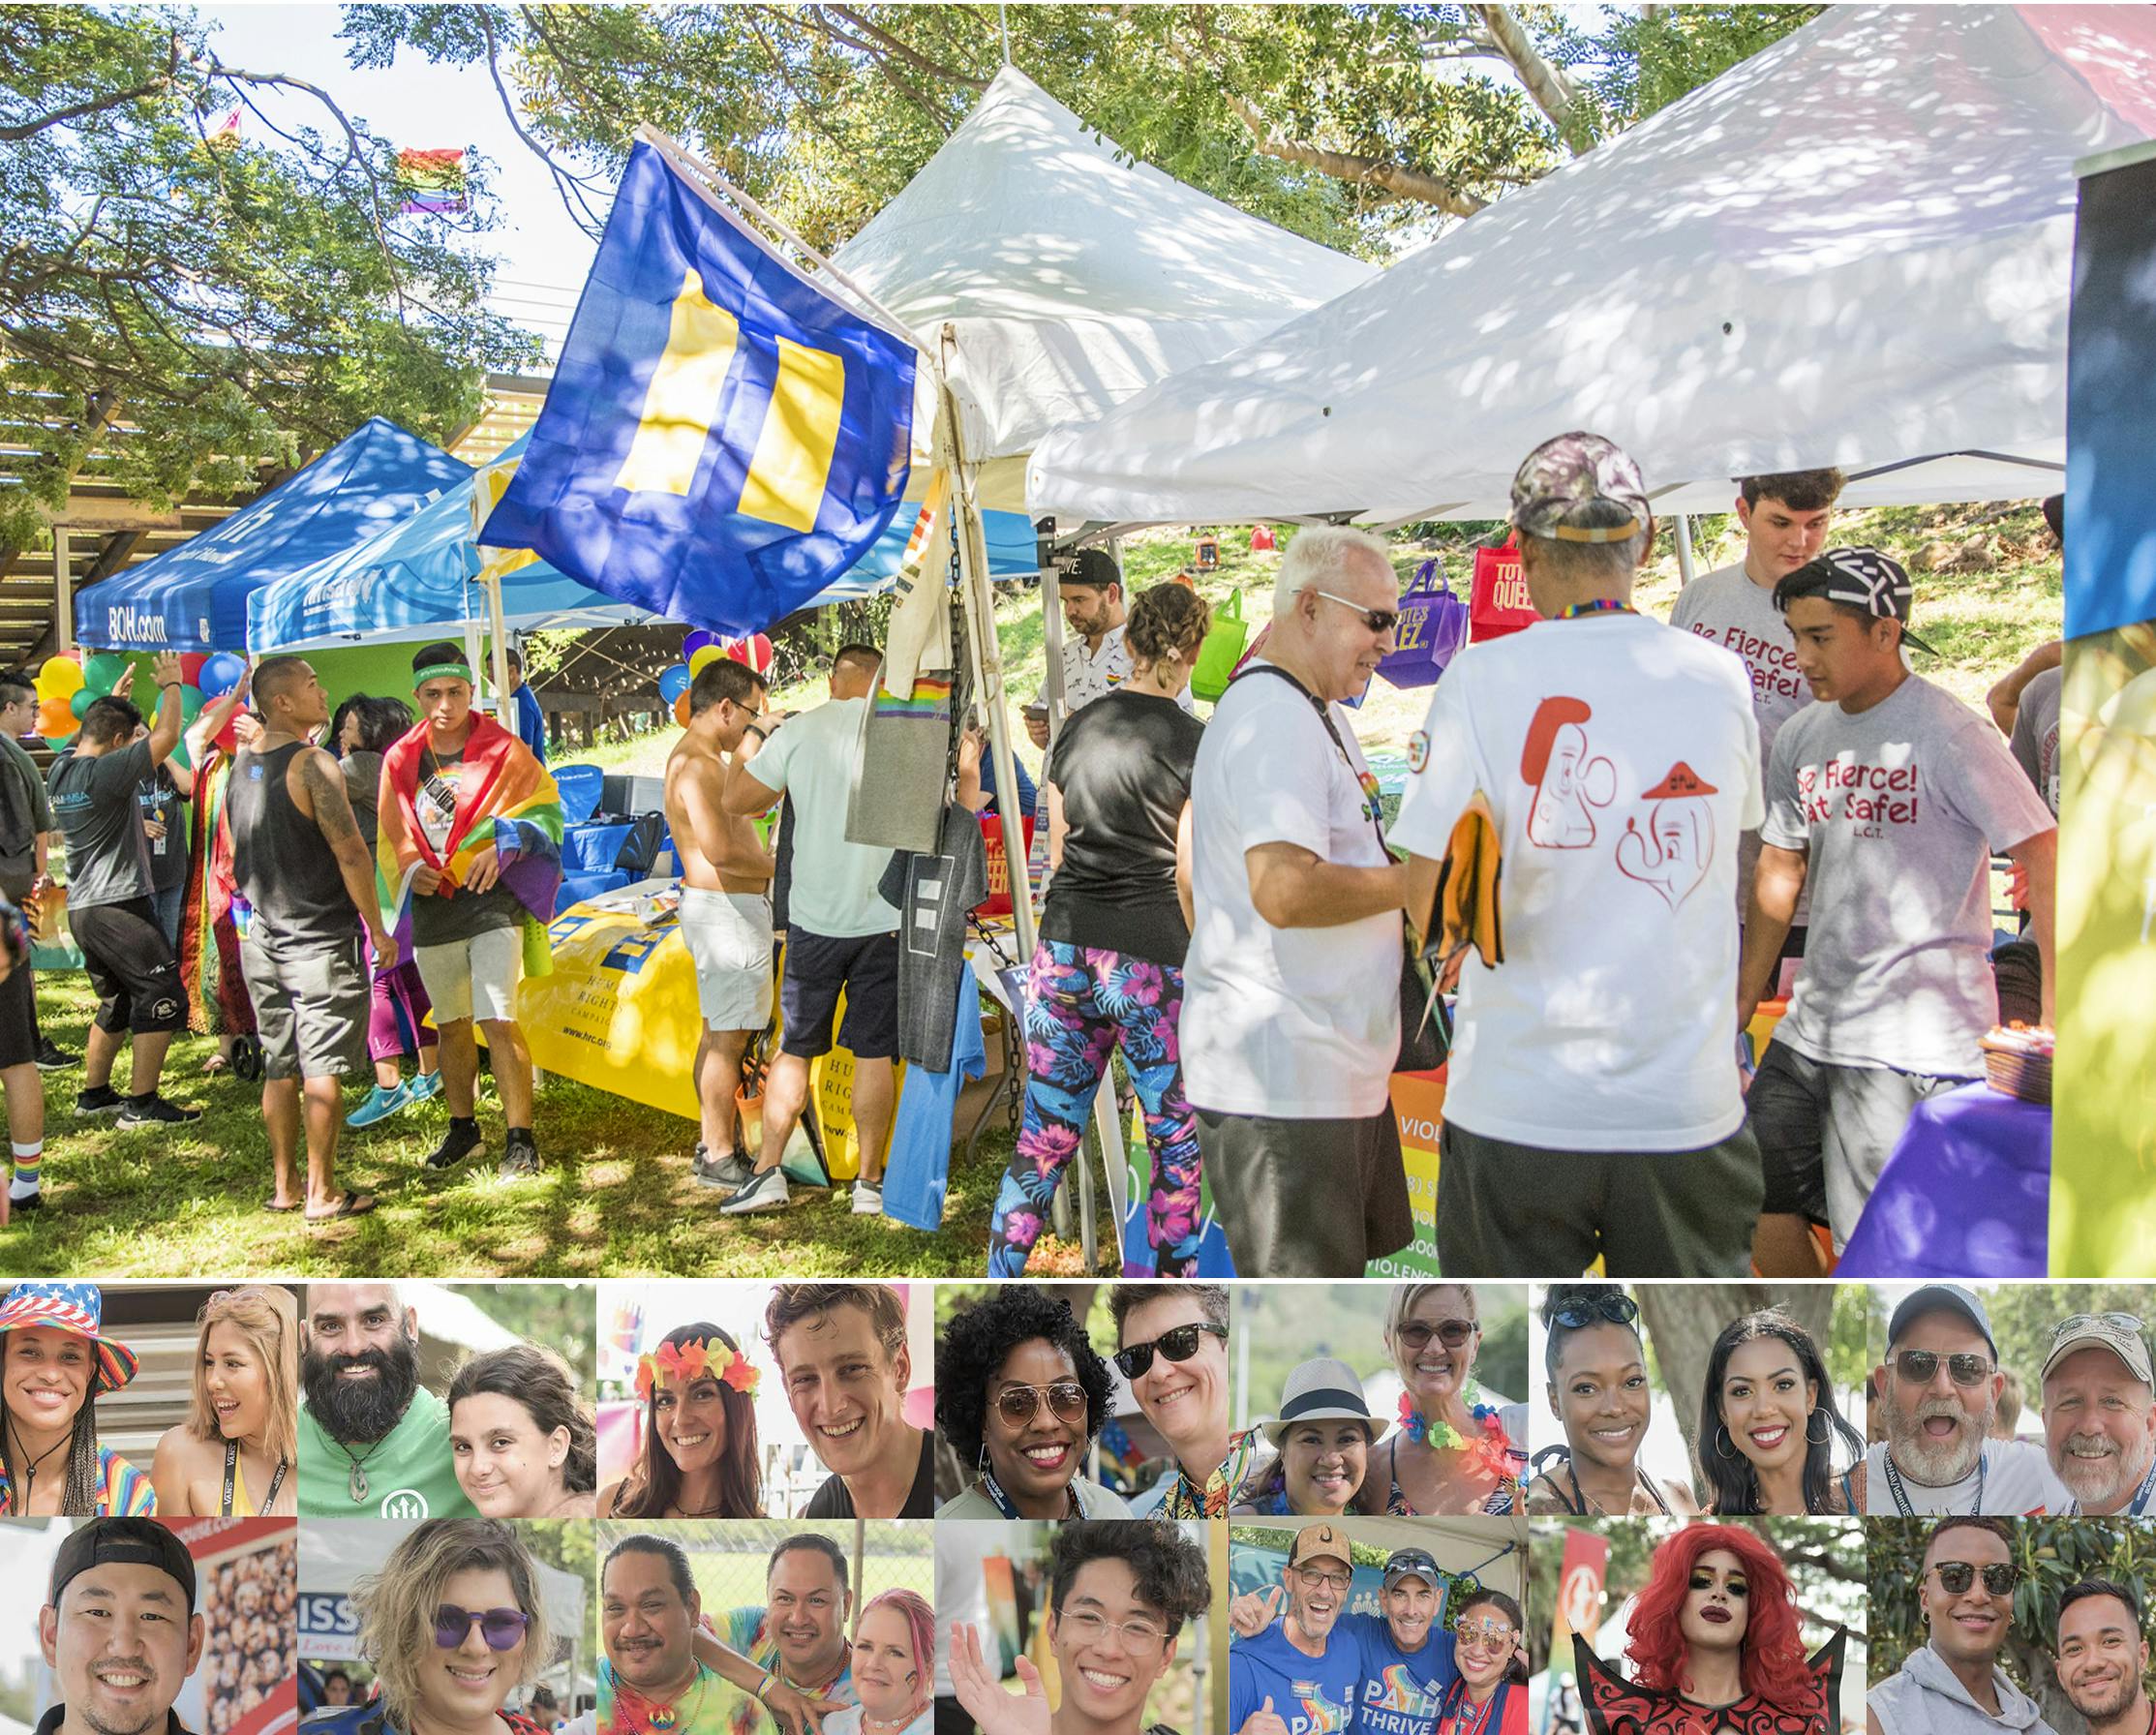 Attendees visit tents and booths under trees at the Honolulu Pride Festival. Beneath the main image, fourteen close up images of diverse attendees, including people of various ethnicities, ages and genders, smiling at the camera. 